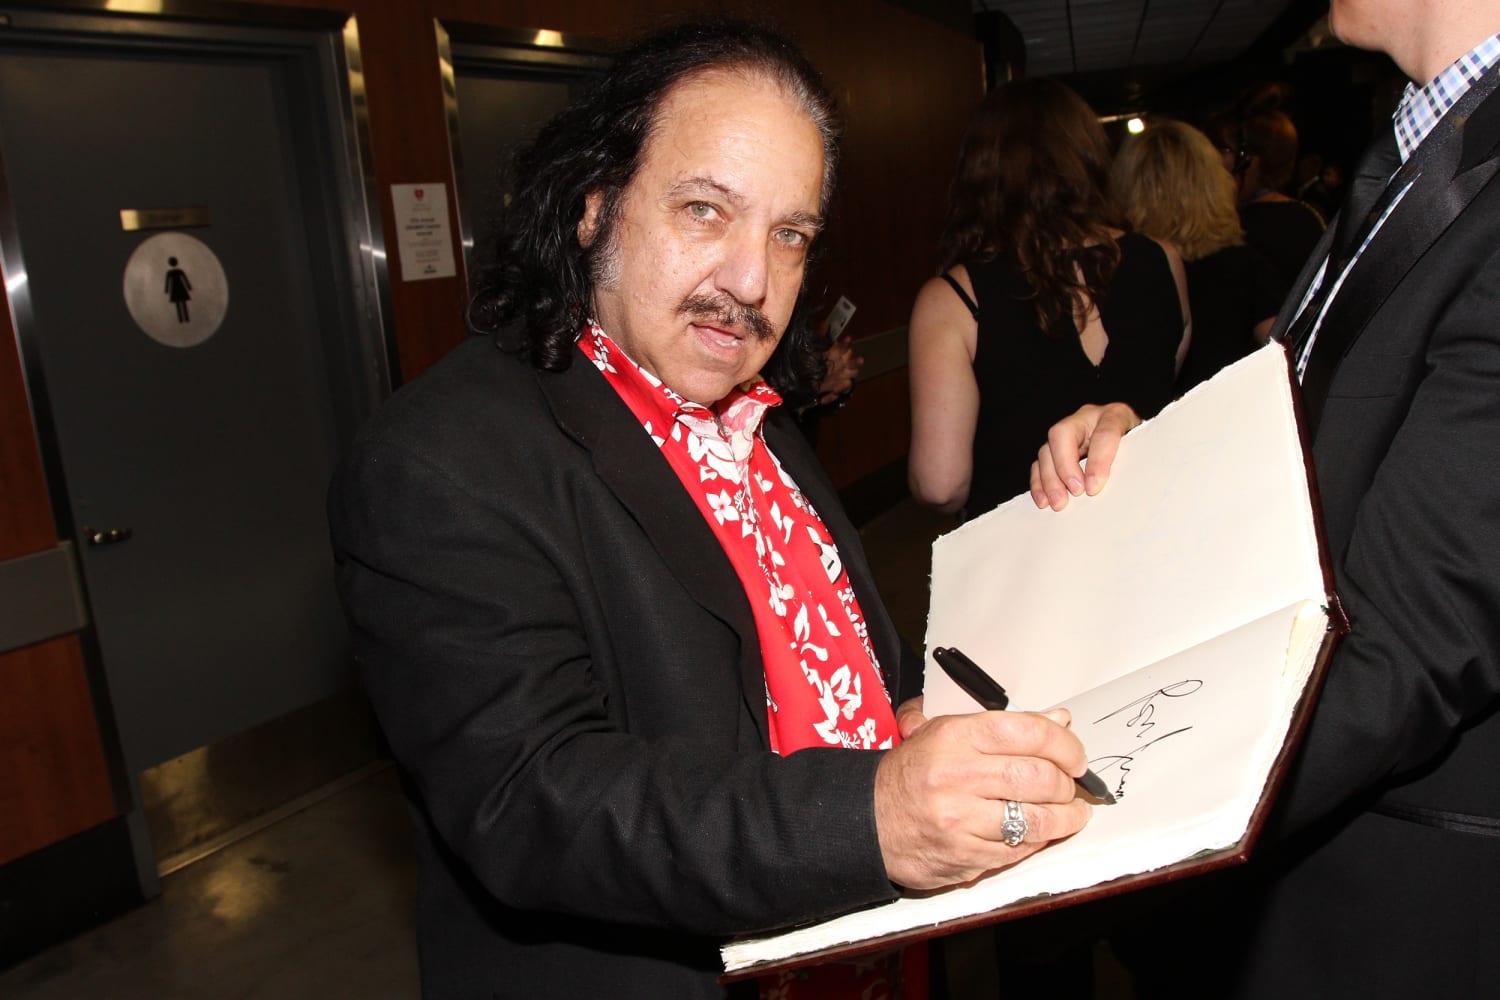 Sex With Dhorson - Porn actor Ron Jeremy charged with rape, sexual assault